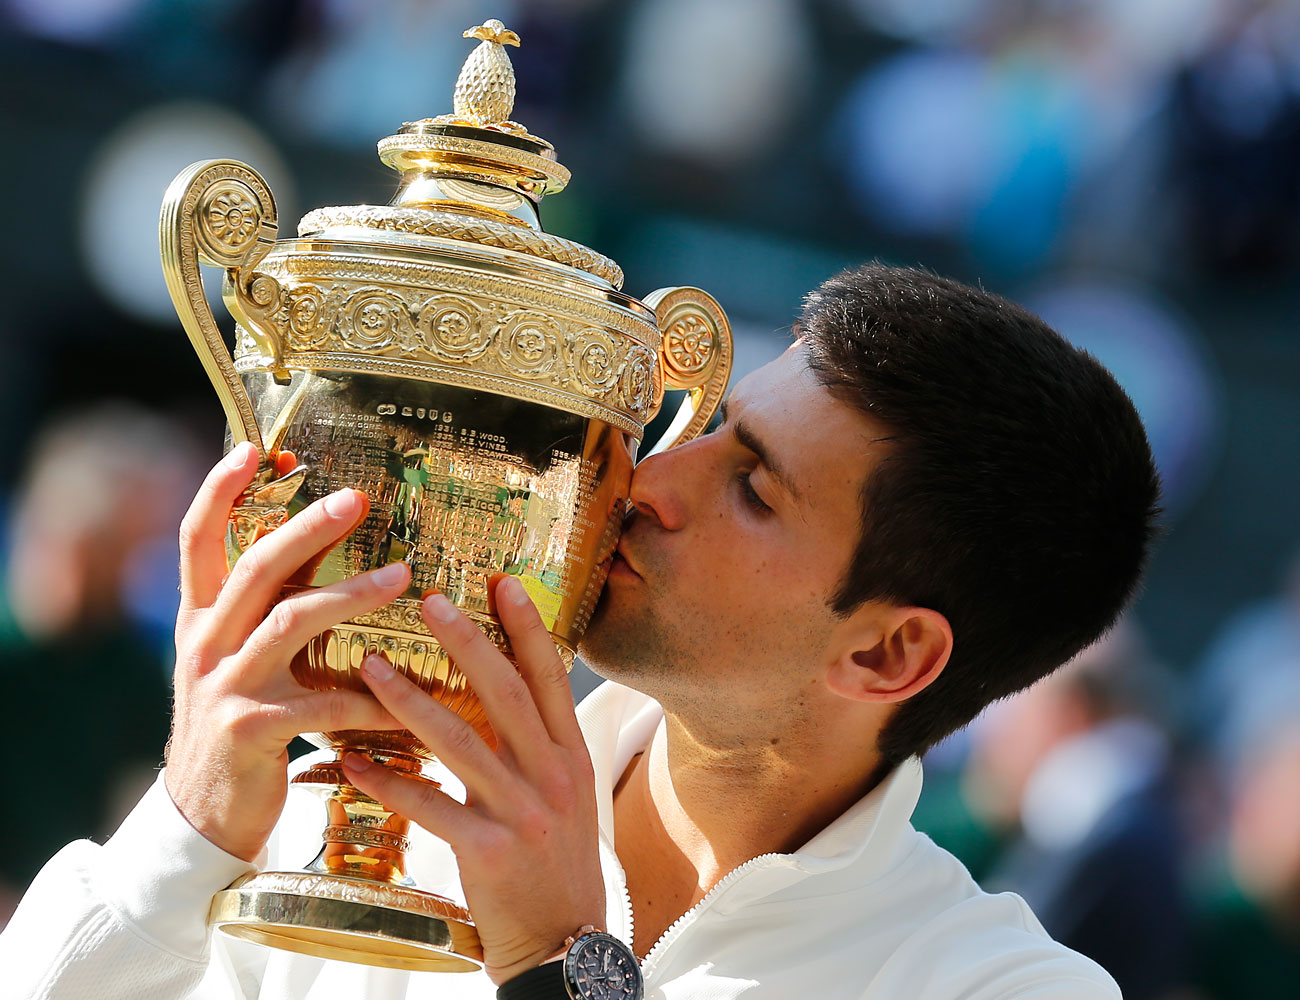 Novak Djokovic kisses the trophy after defeating Roger Federer in the men's singles final at the All England Lawn Tennis Championships in Wimbledon, London, on July 6, 2014